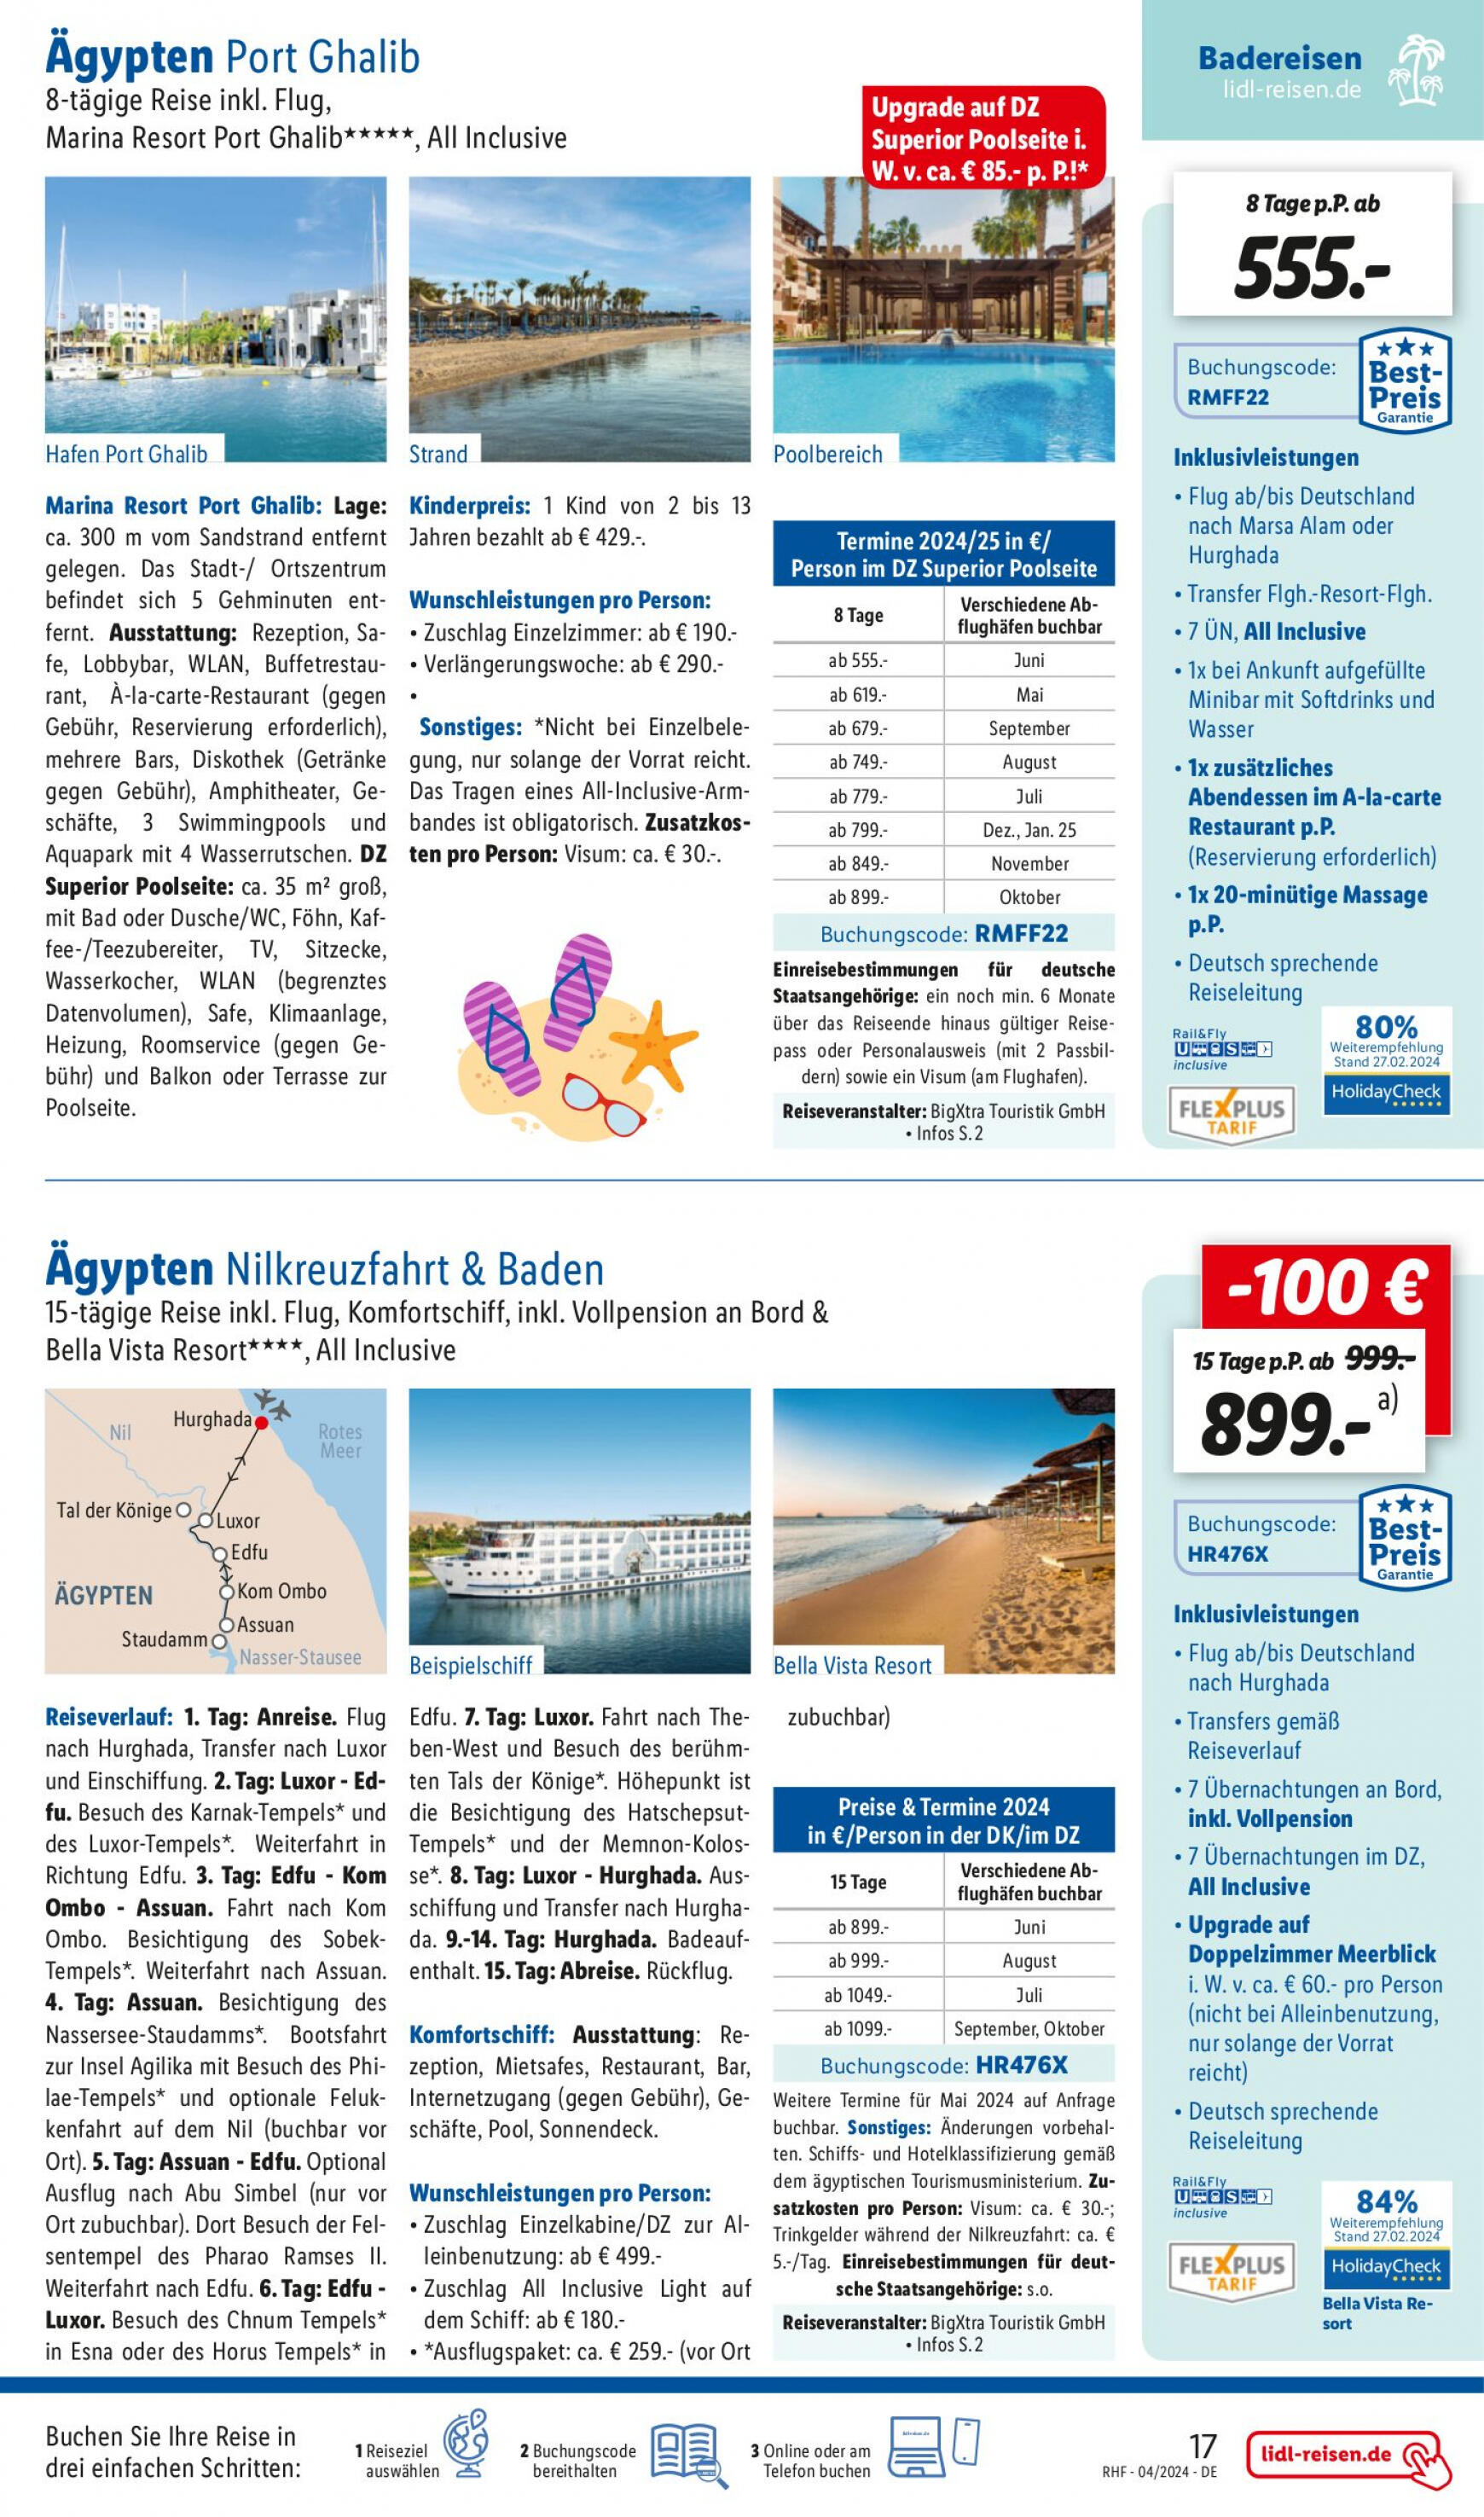 lidl - Flyer Lidl - April Reise-Highlights aktuell 27.03. - 30.04. - page: 17